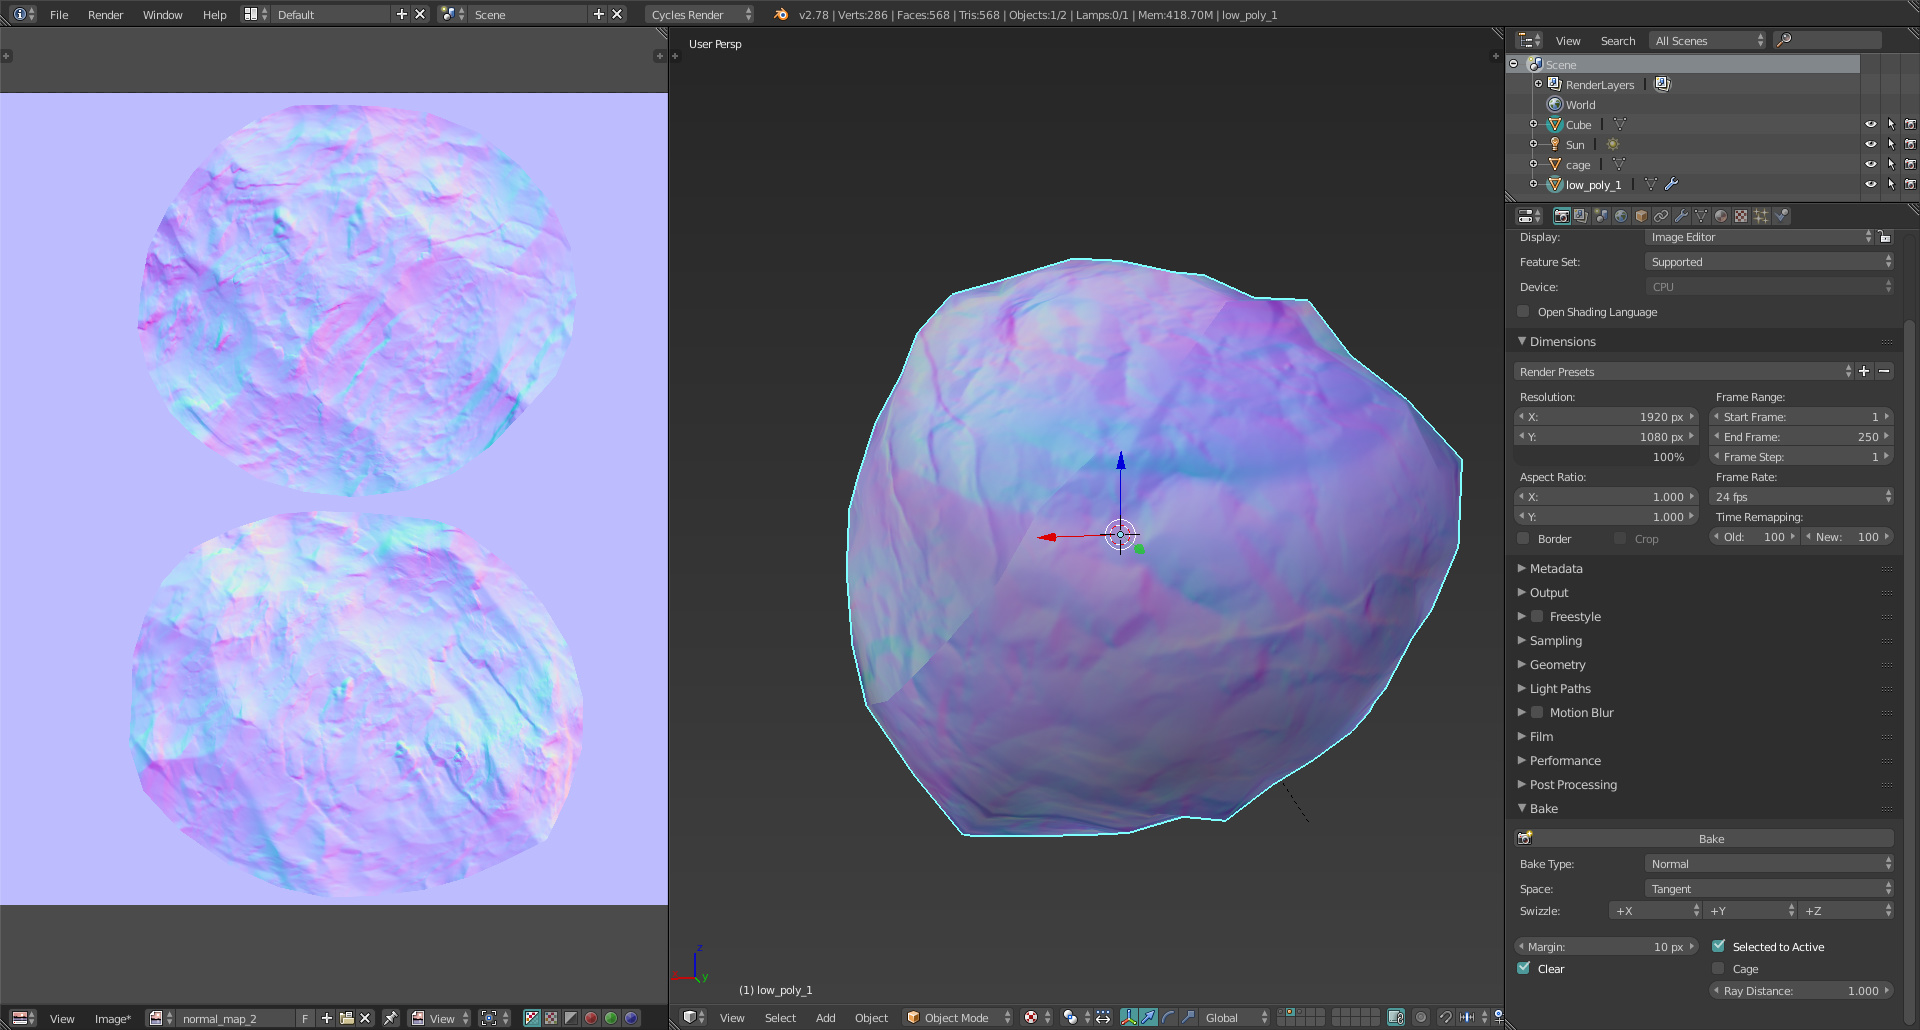 Issue baking normal map with High and Low poly. Please help - Archive -  Developer Forum